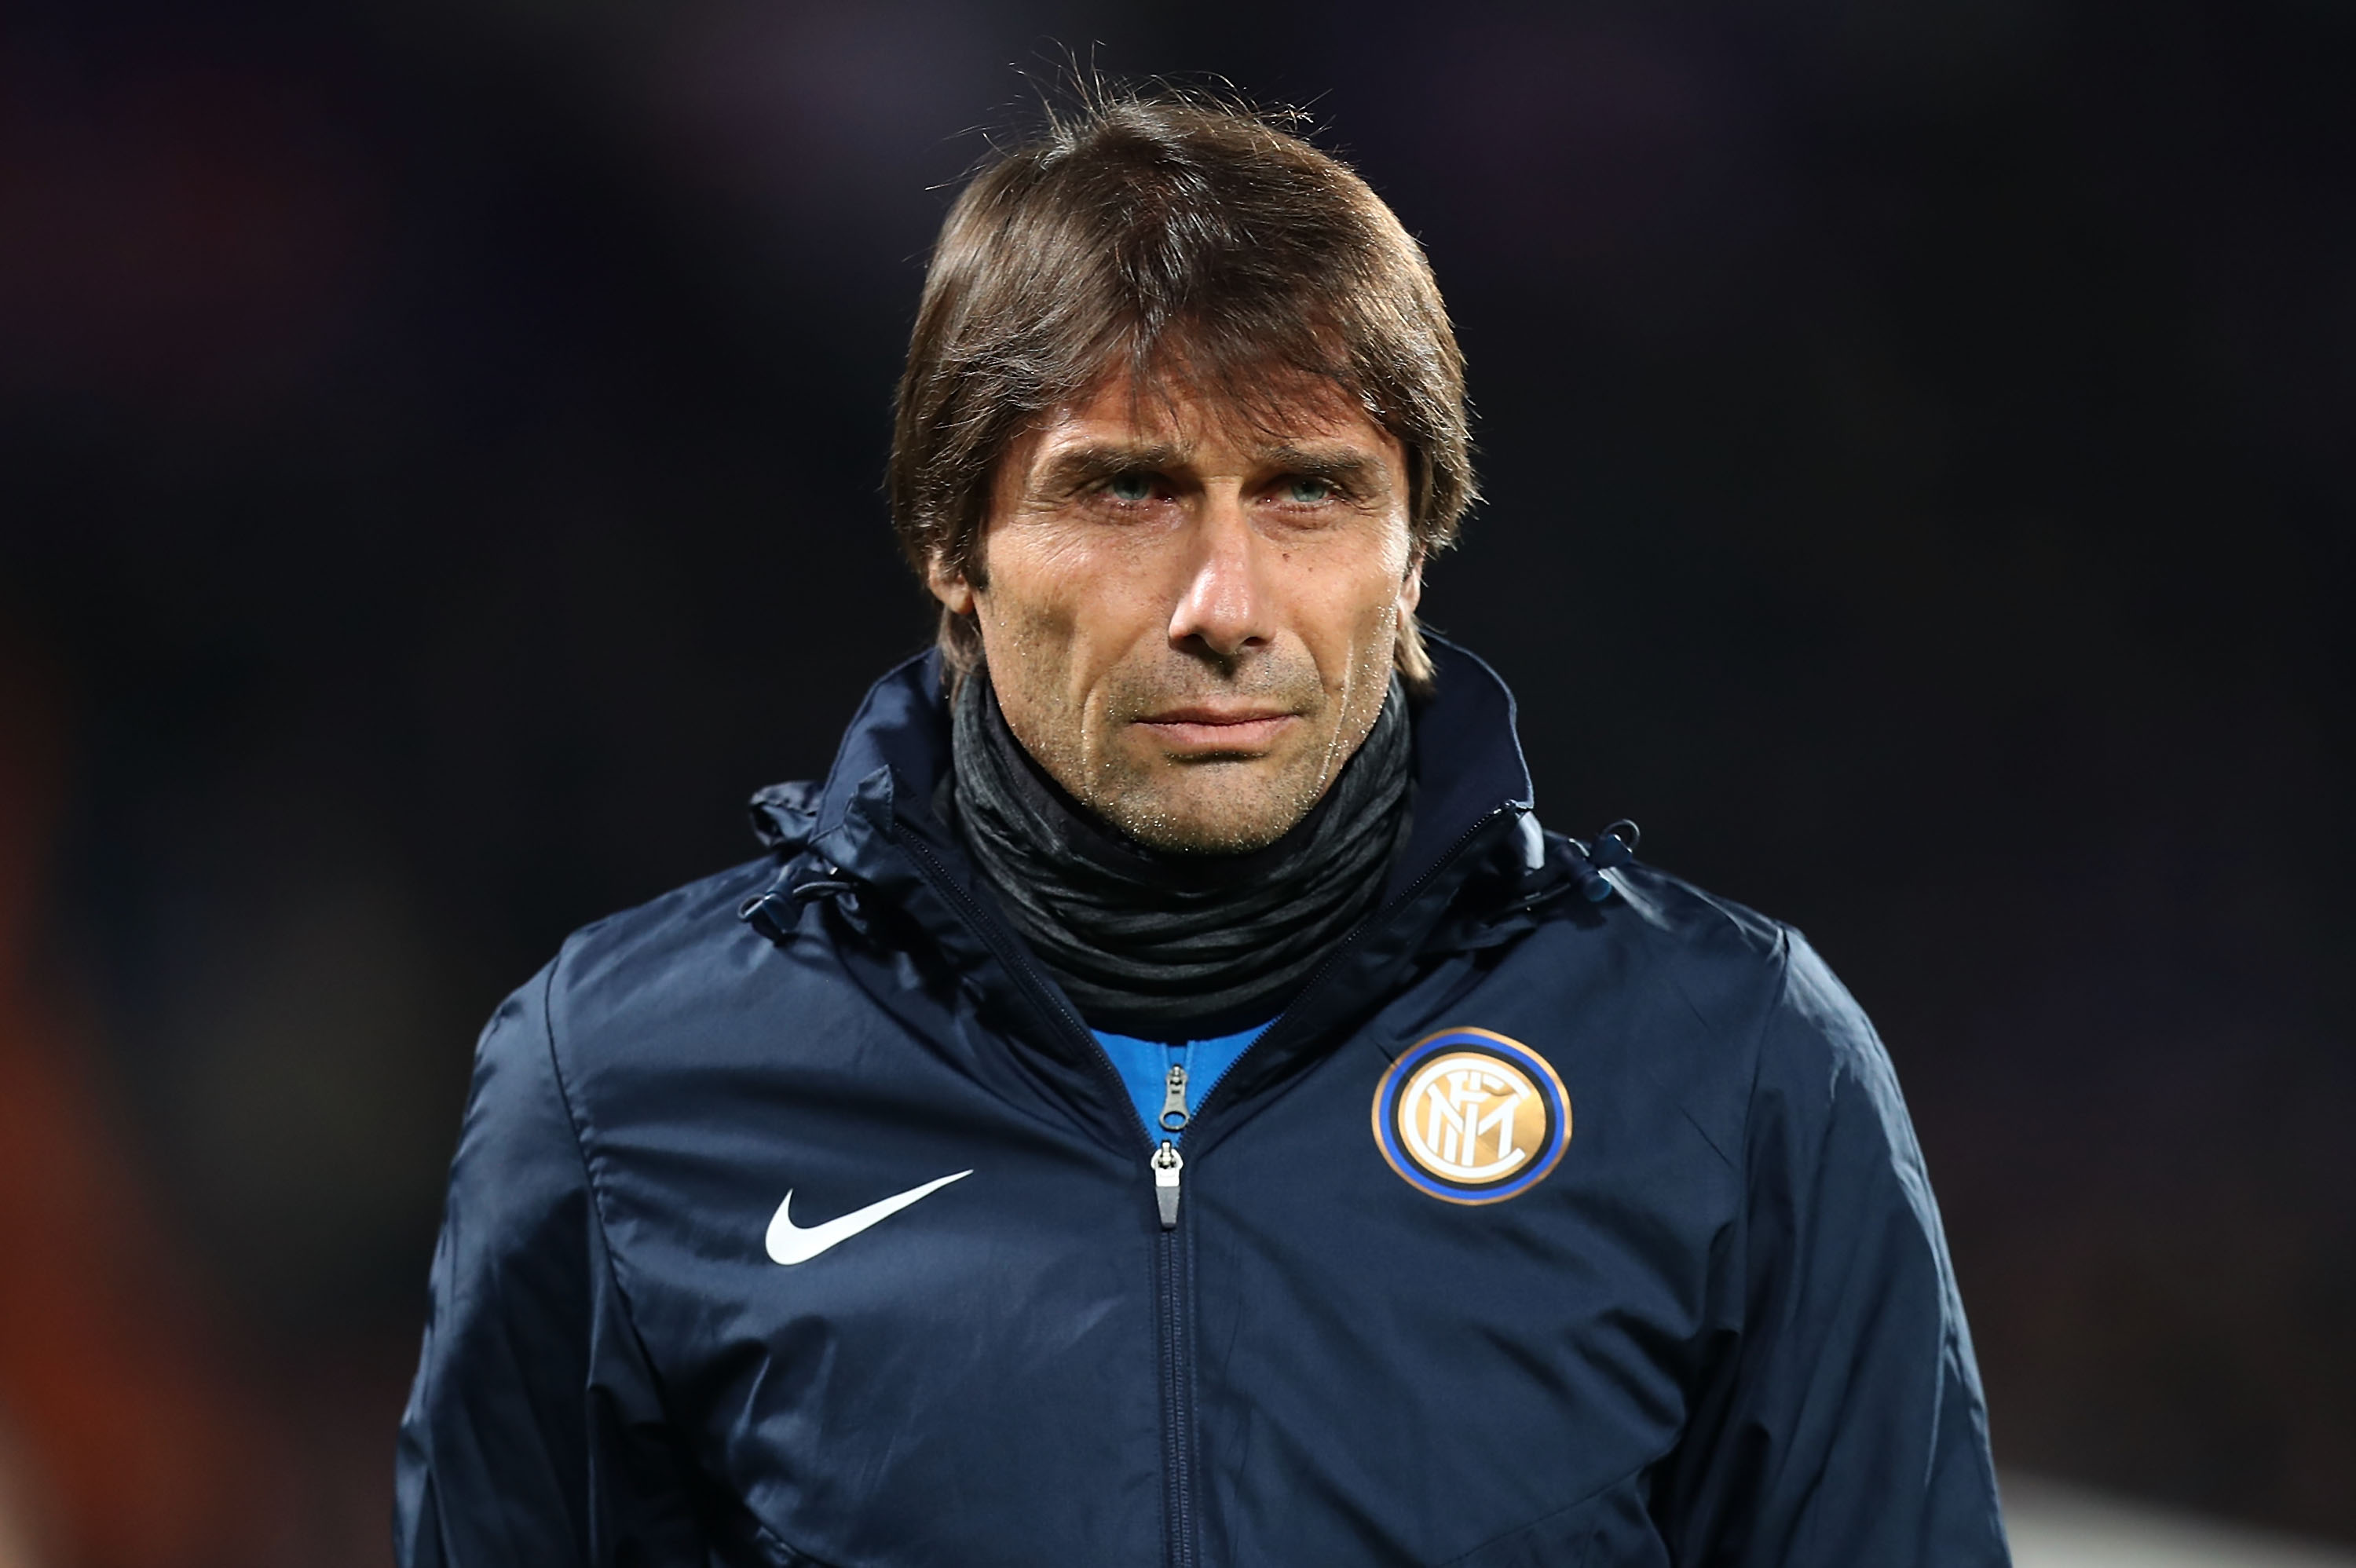 Conte led Inter to the 2020/21 Serie A title (Photo by Gabriele Maltinti/Getty Images)